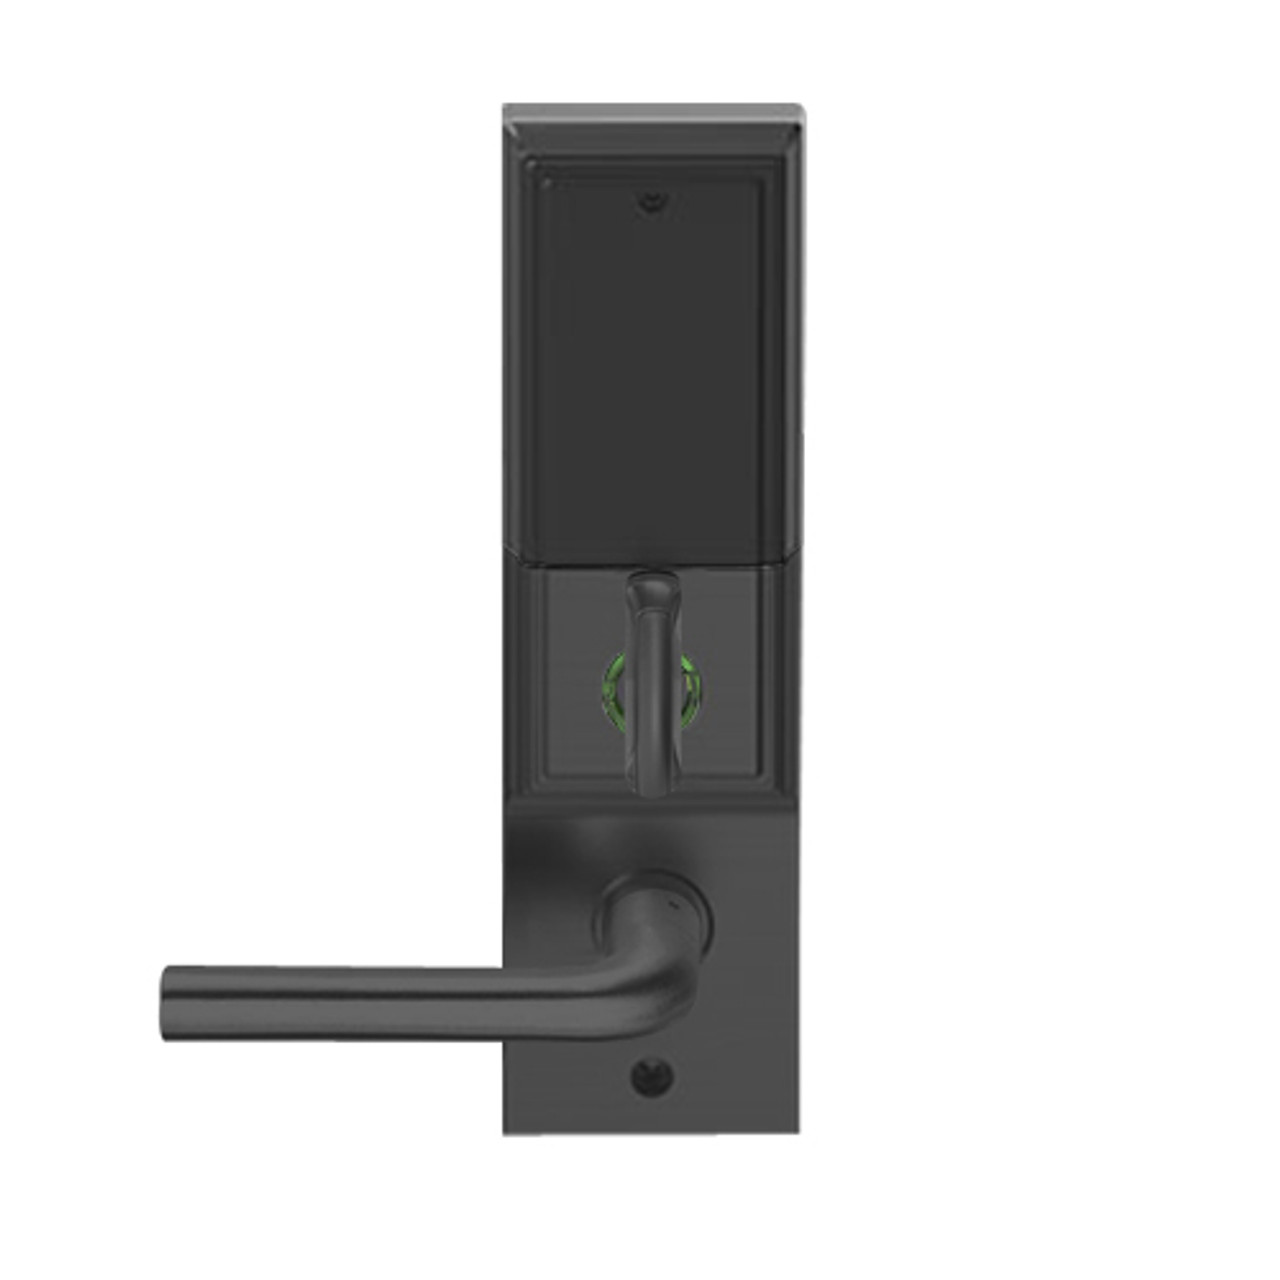 LEMD-ADD-L-02-622 Schlage Less Mortise Cylinder Privacy/Apartment Wireless Addison Mortise Deadbolt Lock with LED and 02 Lever in Matte Black